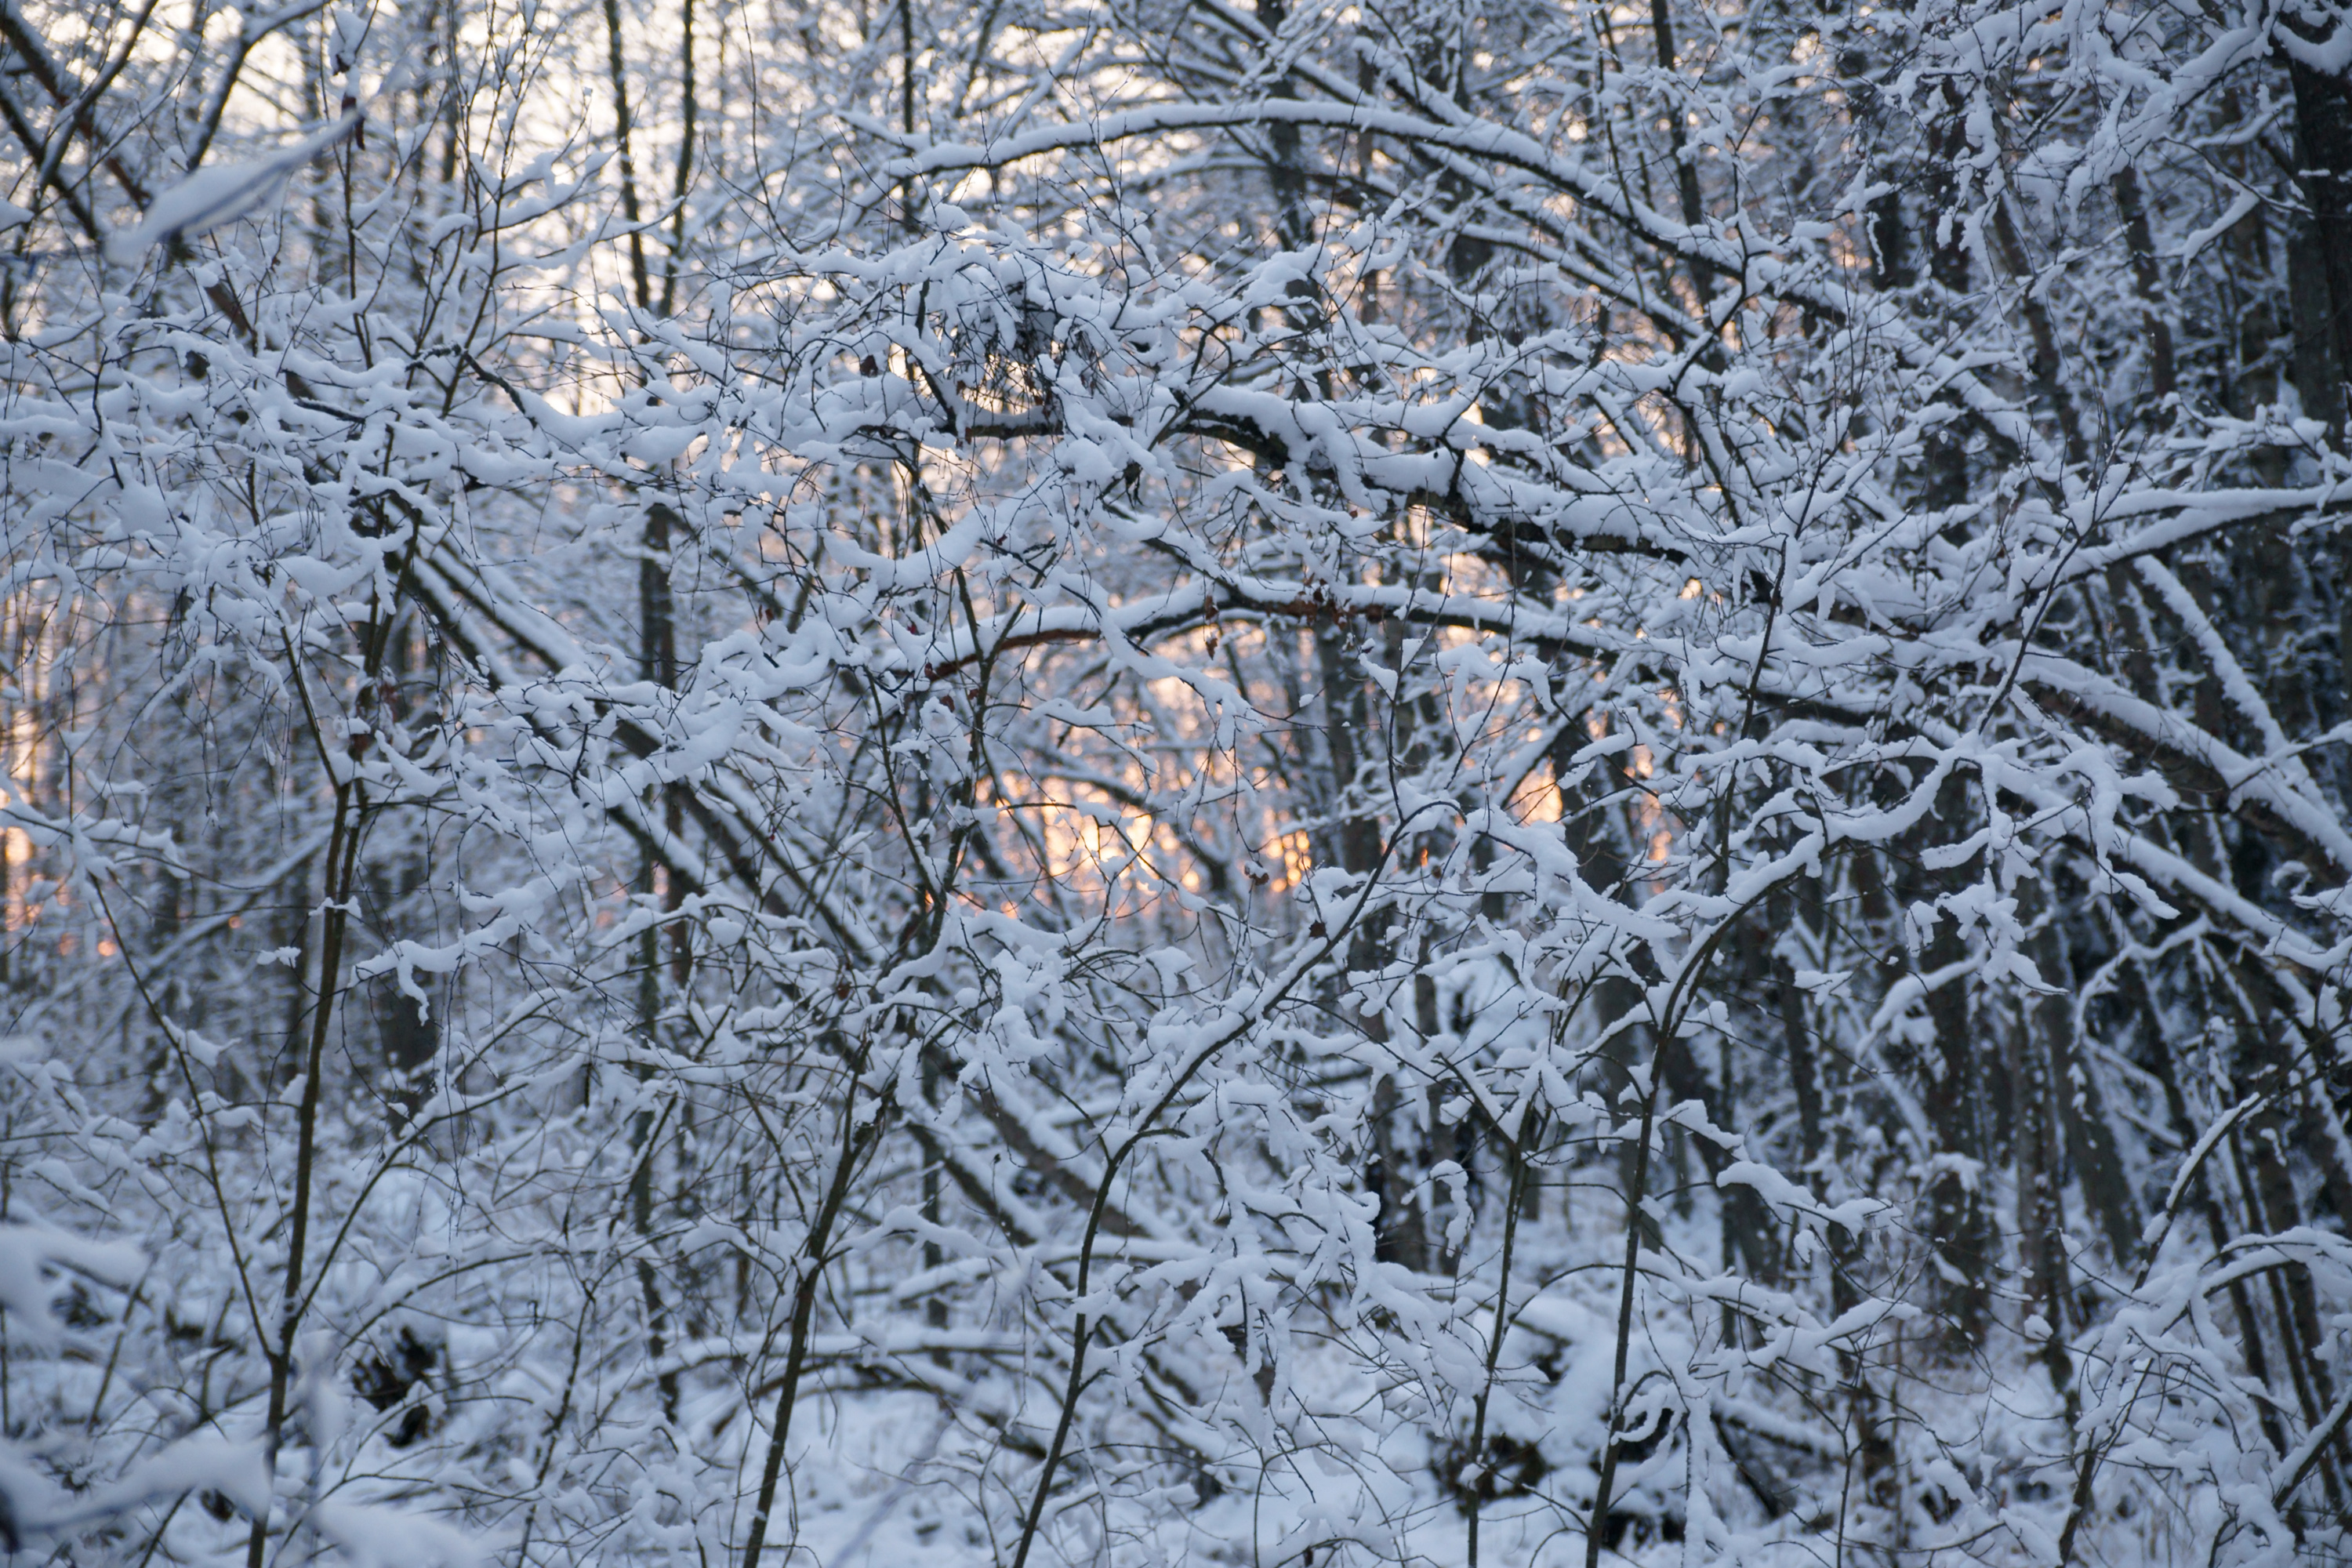 File:Snowy branches and sunset.JPG - Wikimedia Commons